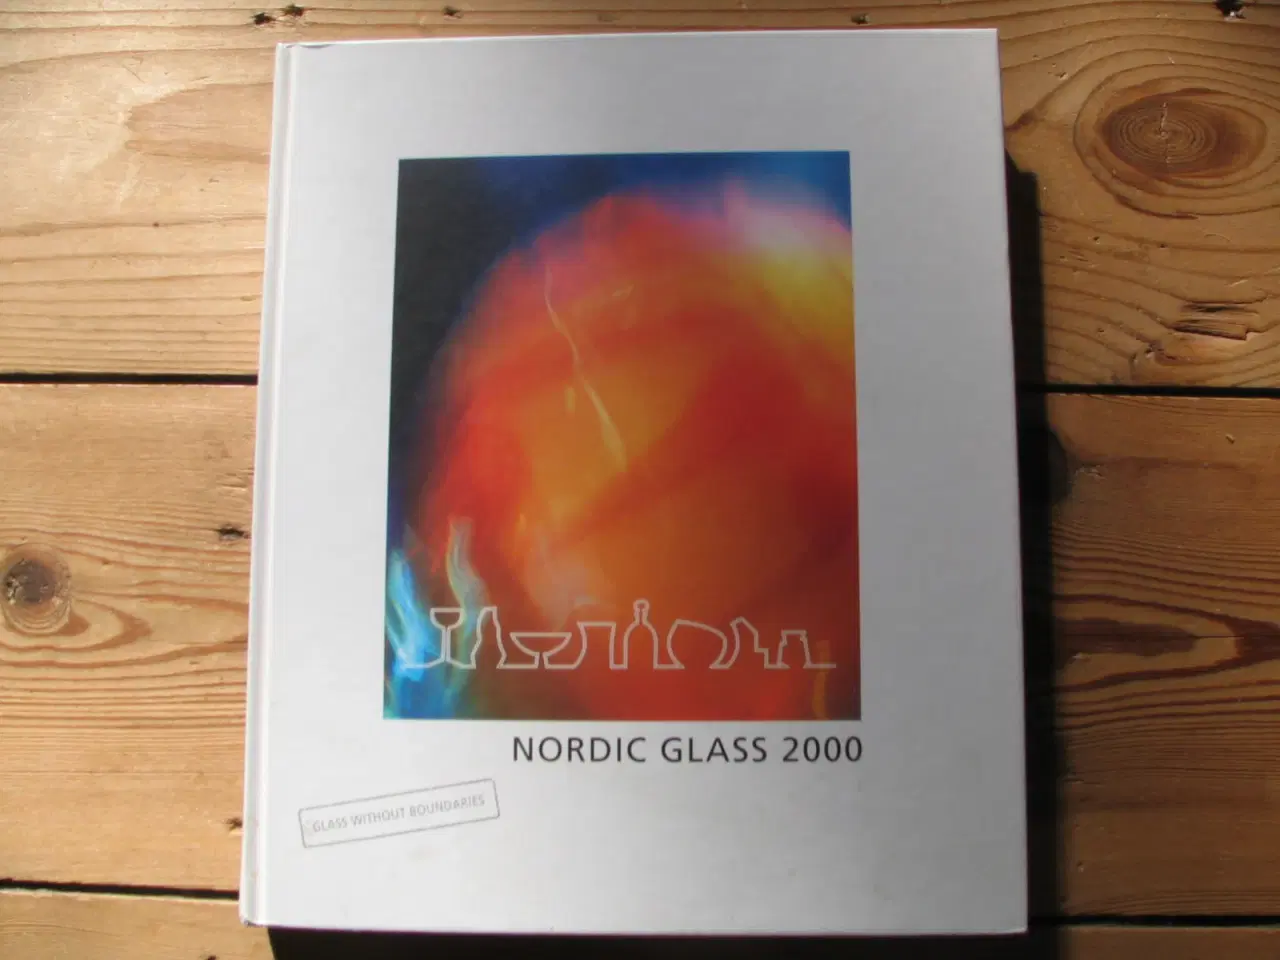 Billede 1 - Nordic glass 2000 – Glass without Boundaries